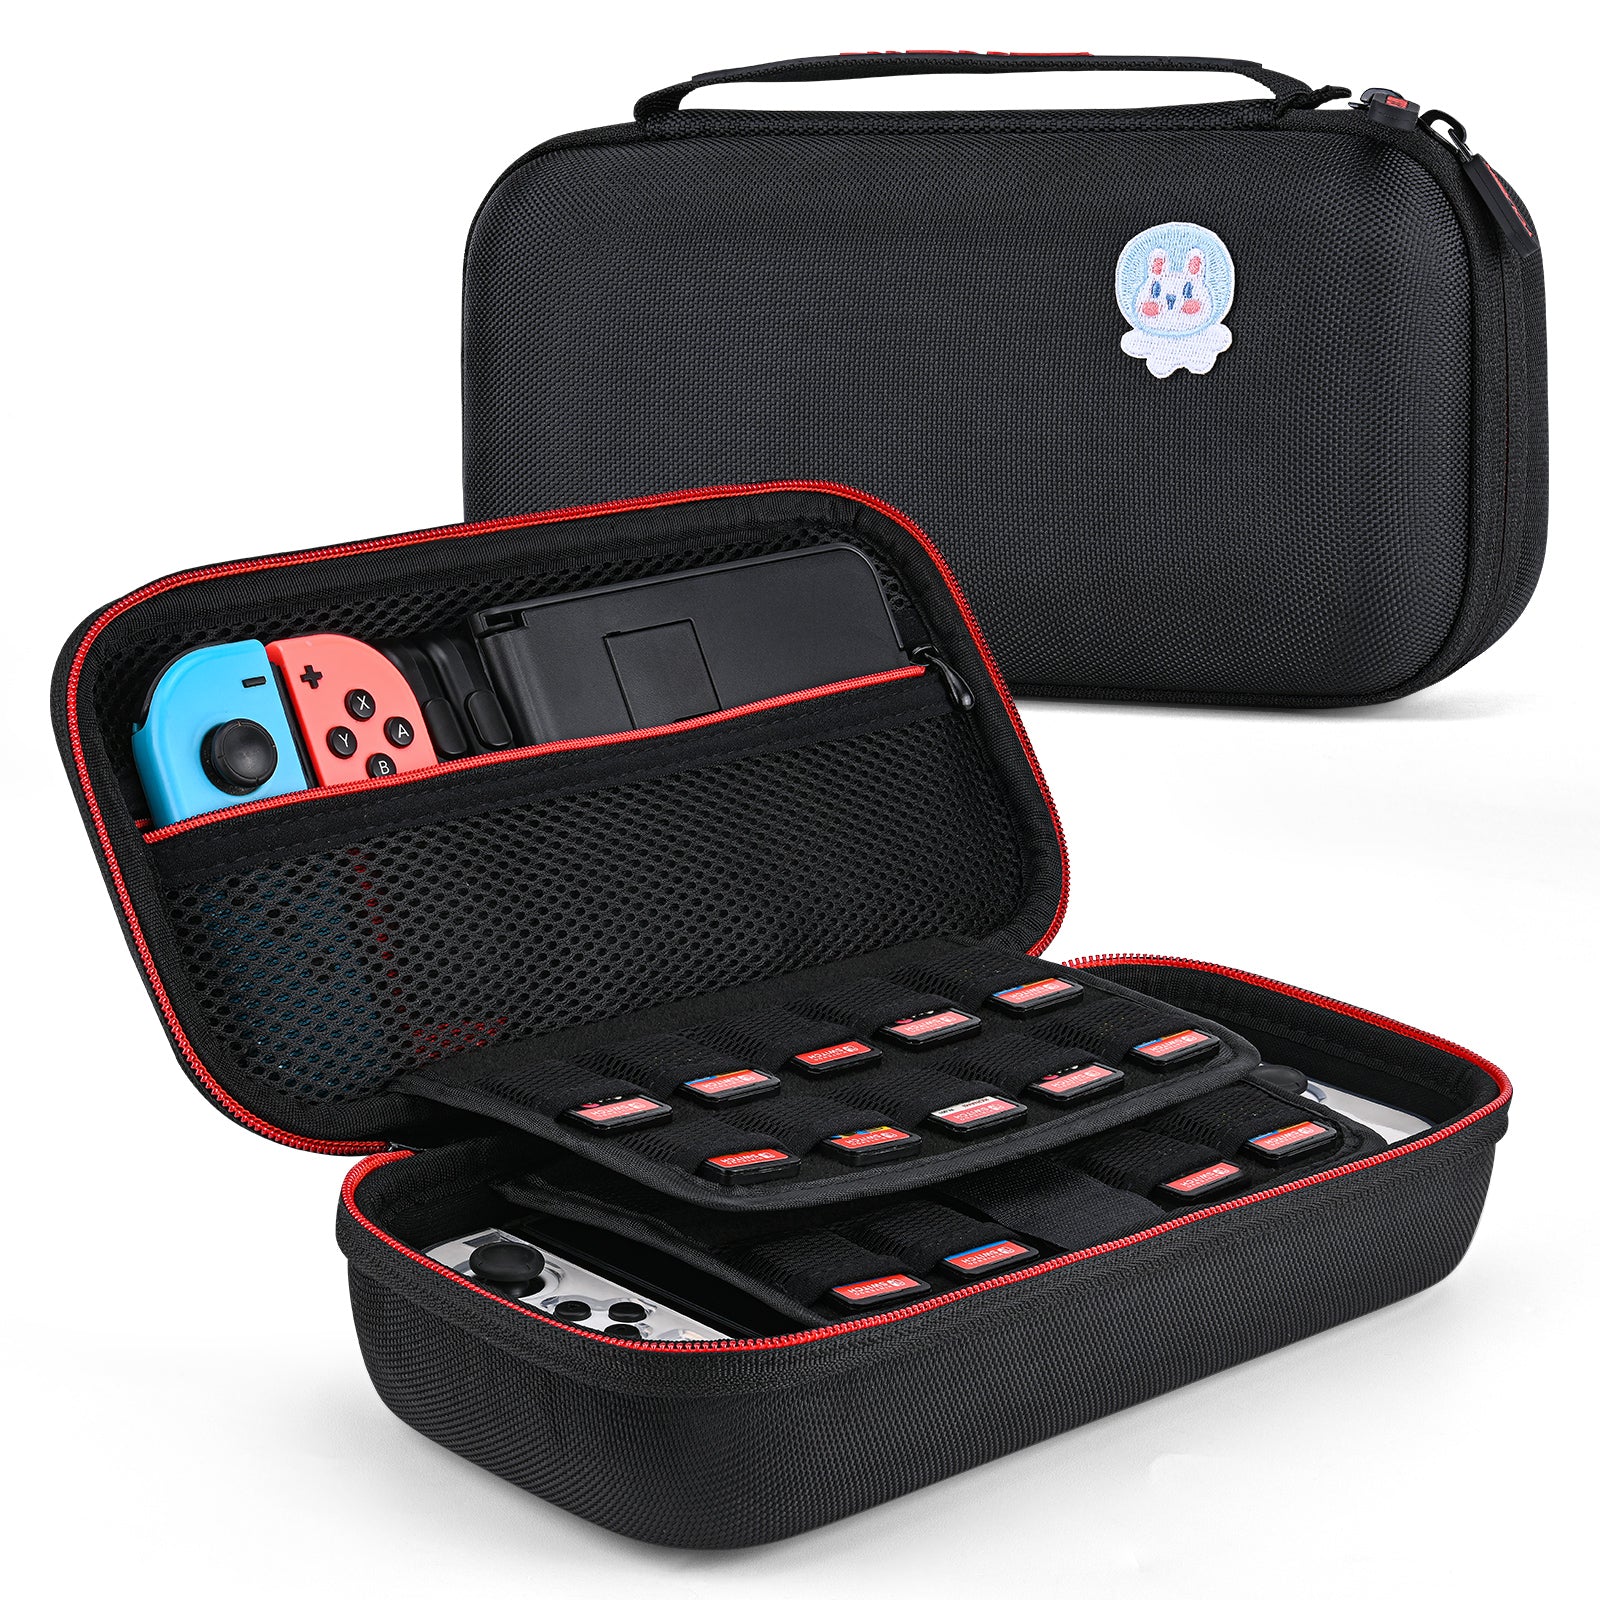 Younik OLED Carrying Case for Switch OLED, Best OLED Case